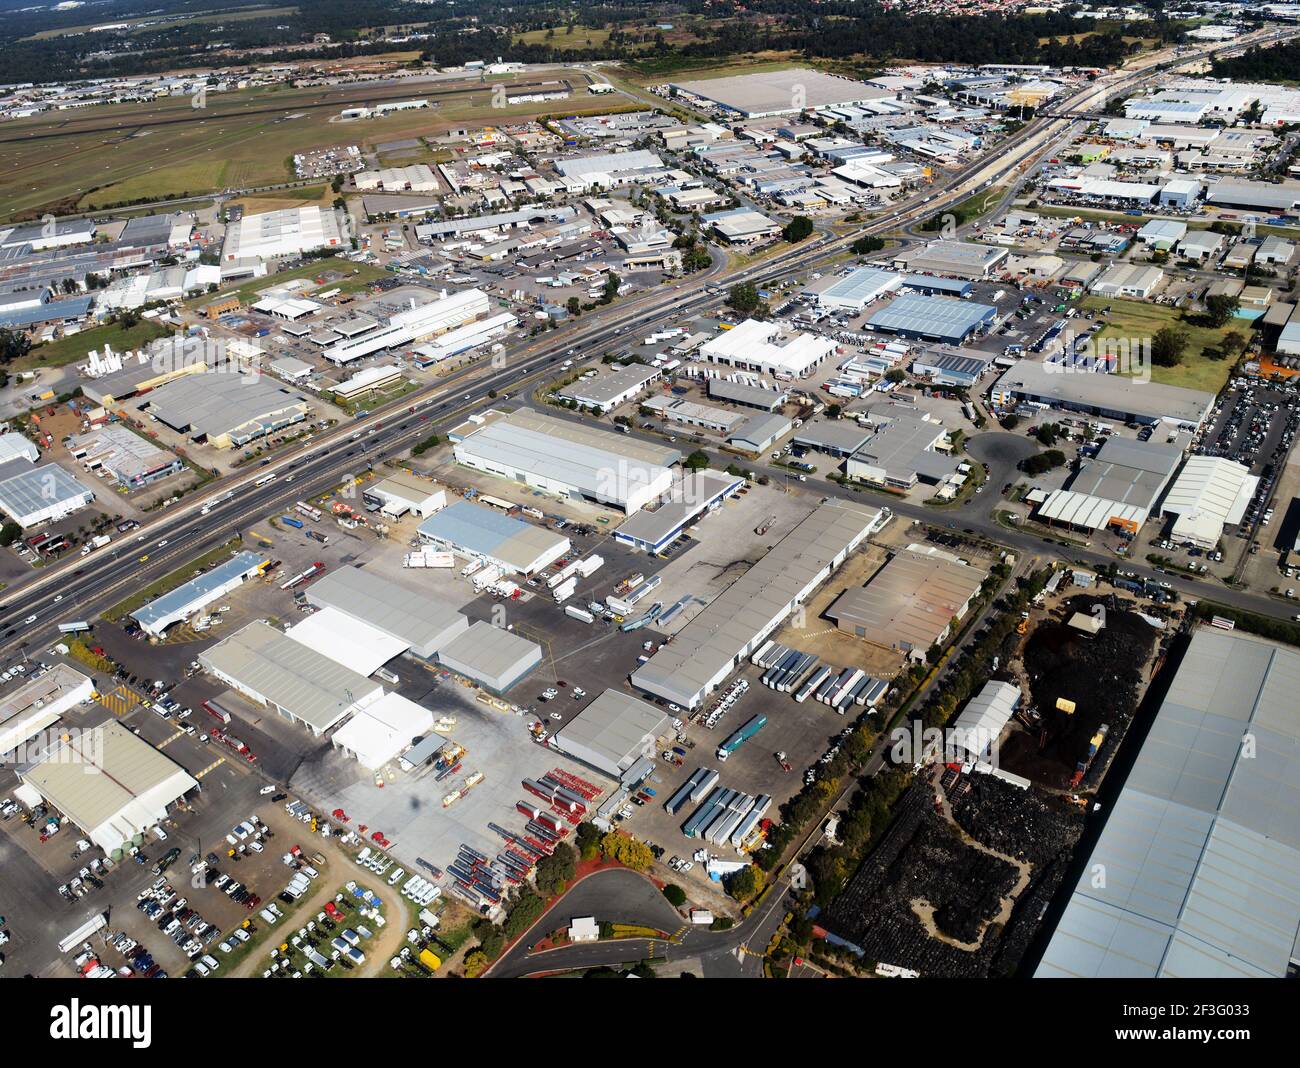 Aerial view of the industrial and distribution centres in Rocklea, Queensland, Australia. Stock Photo